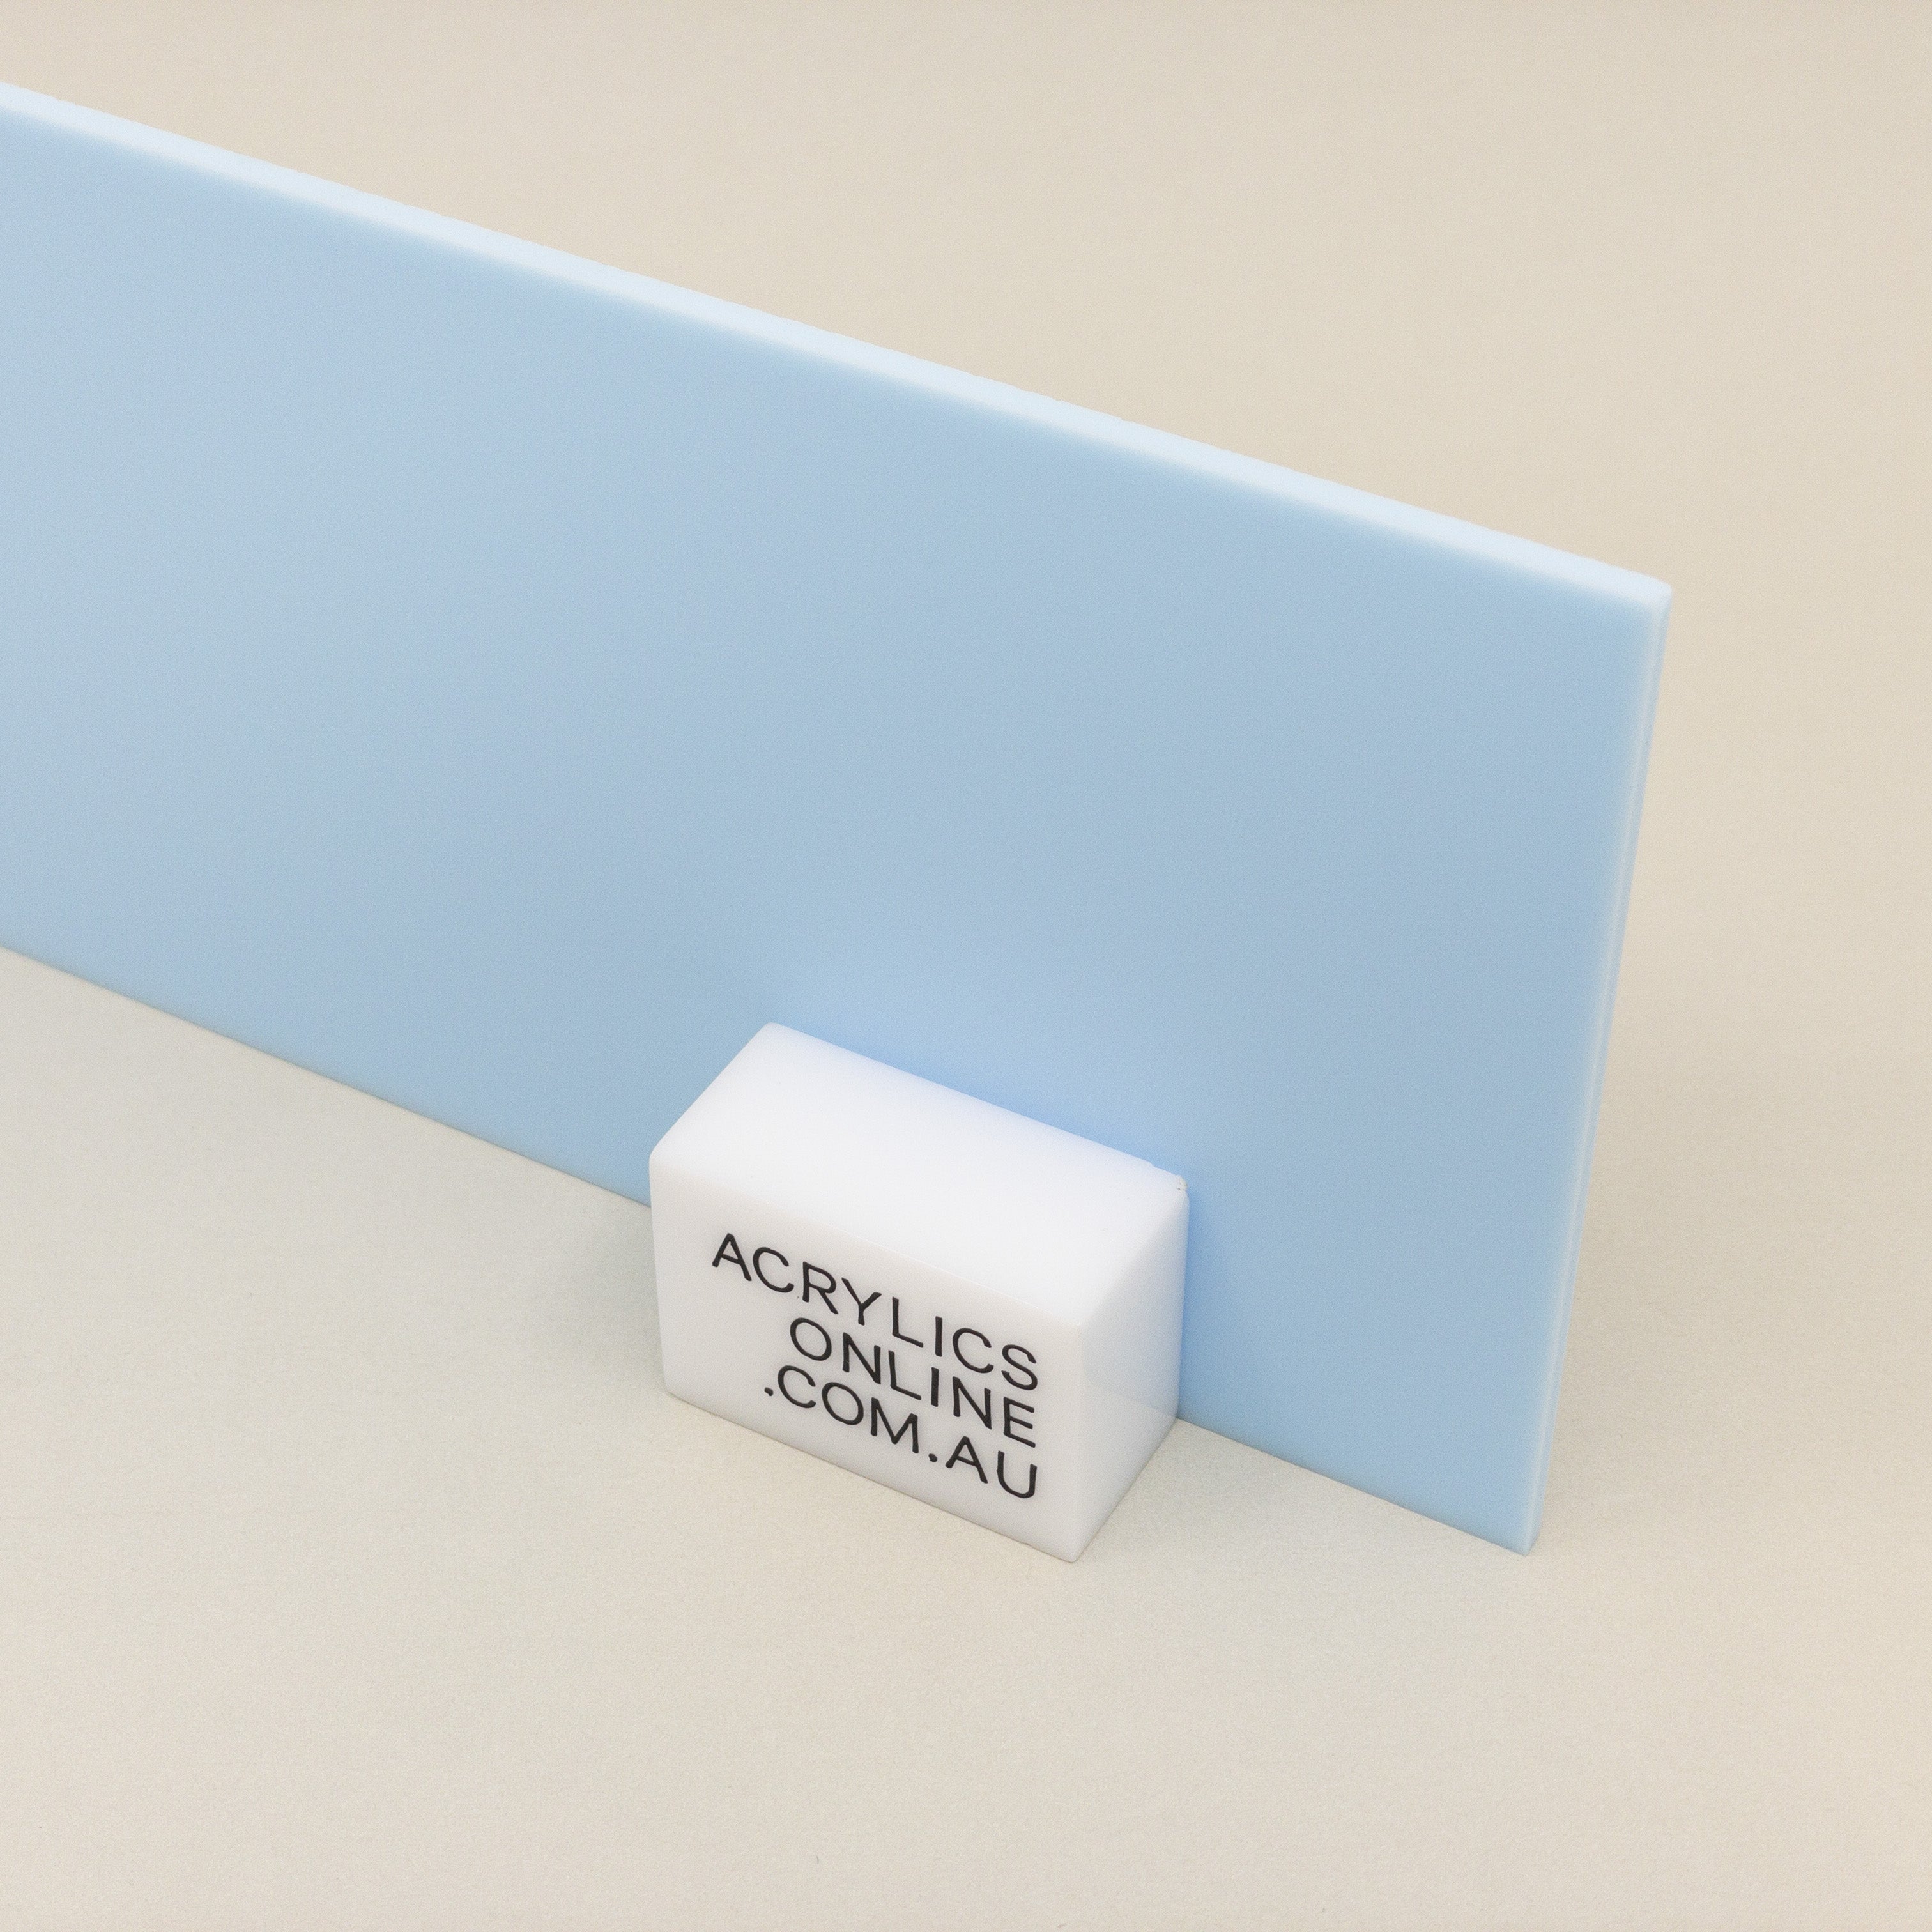 CERULEAN BLUE ACRYLIC SHEET — Acrylics Online — Acrylic Products and ...